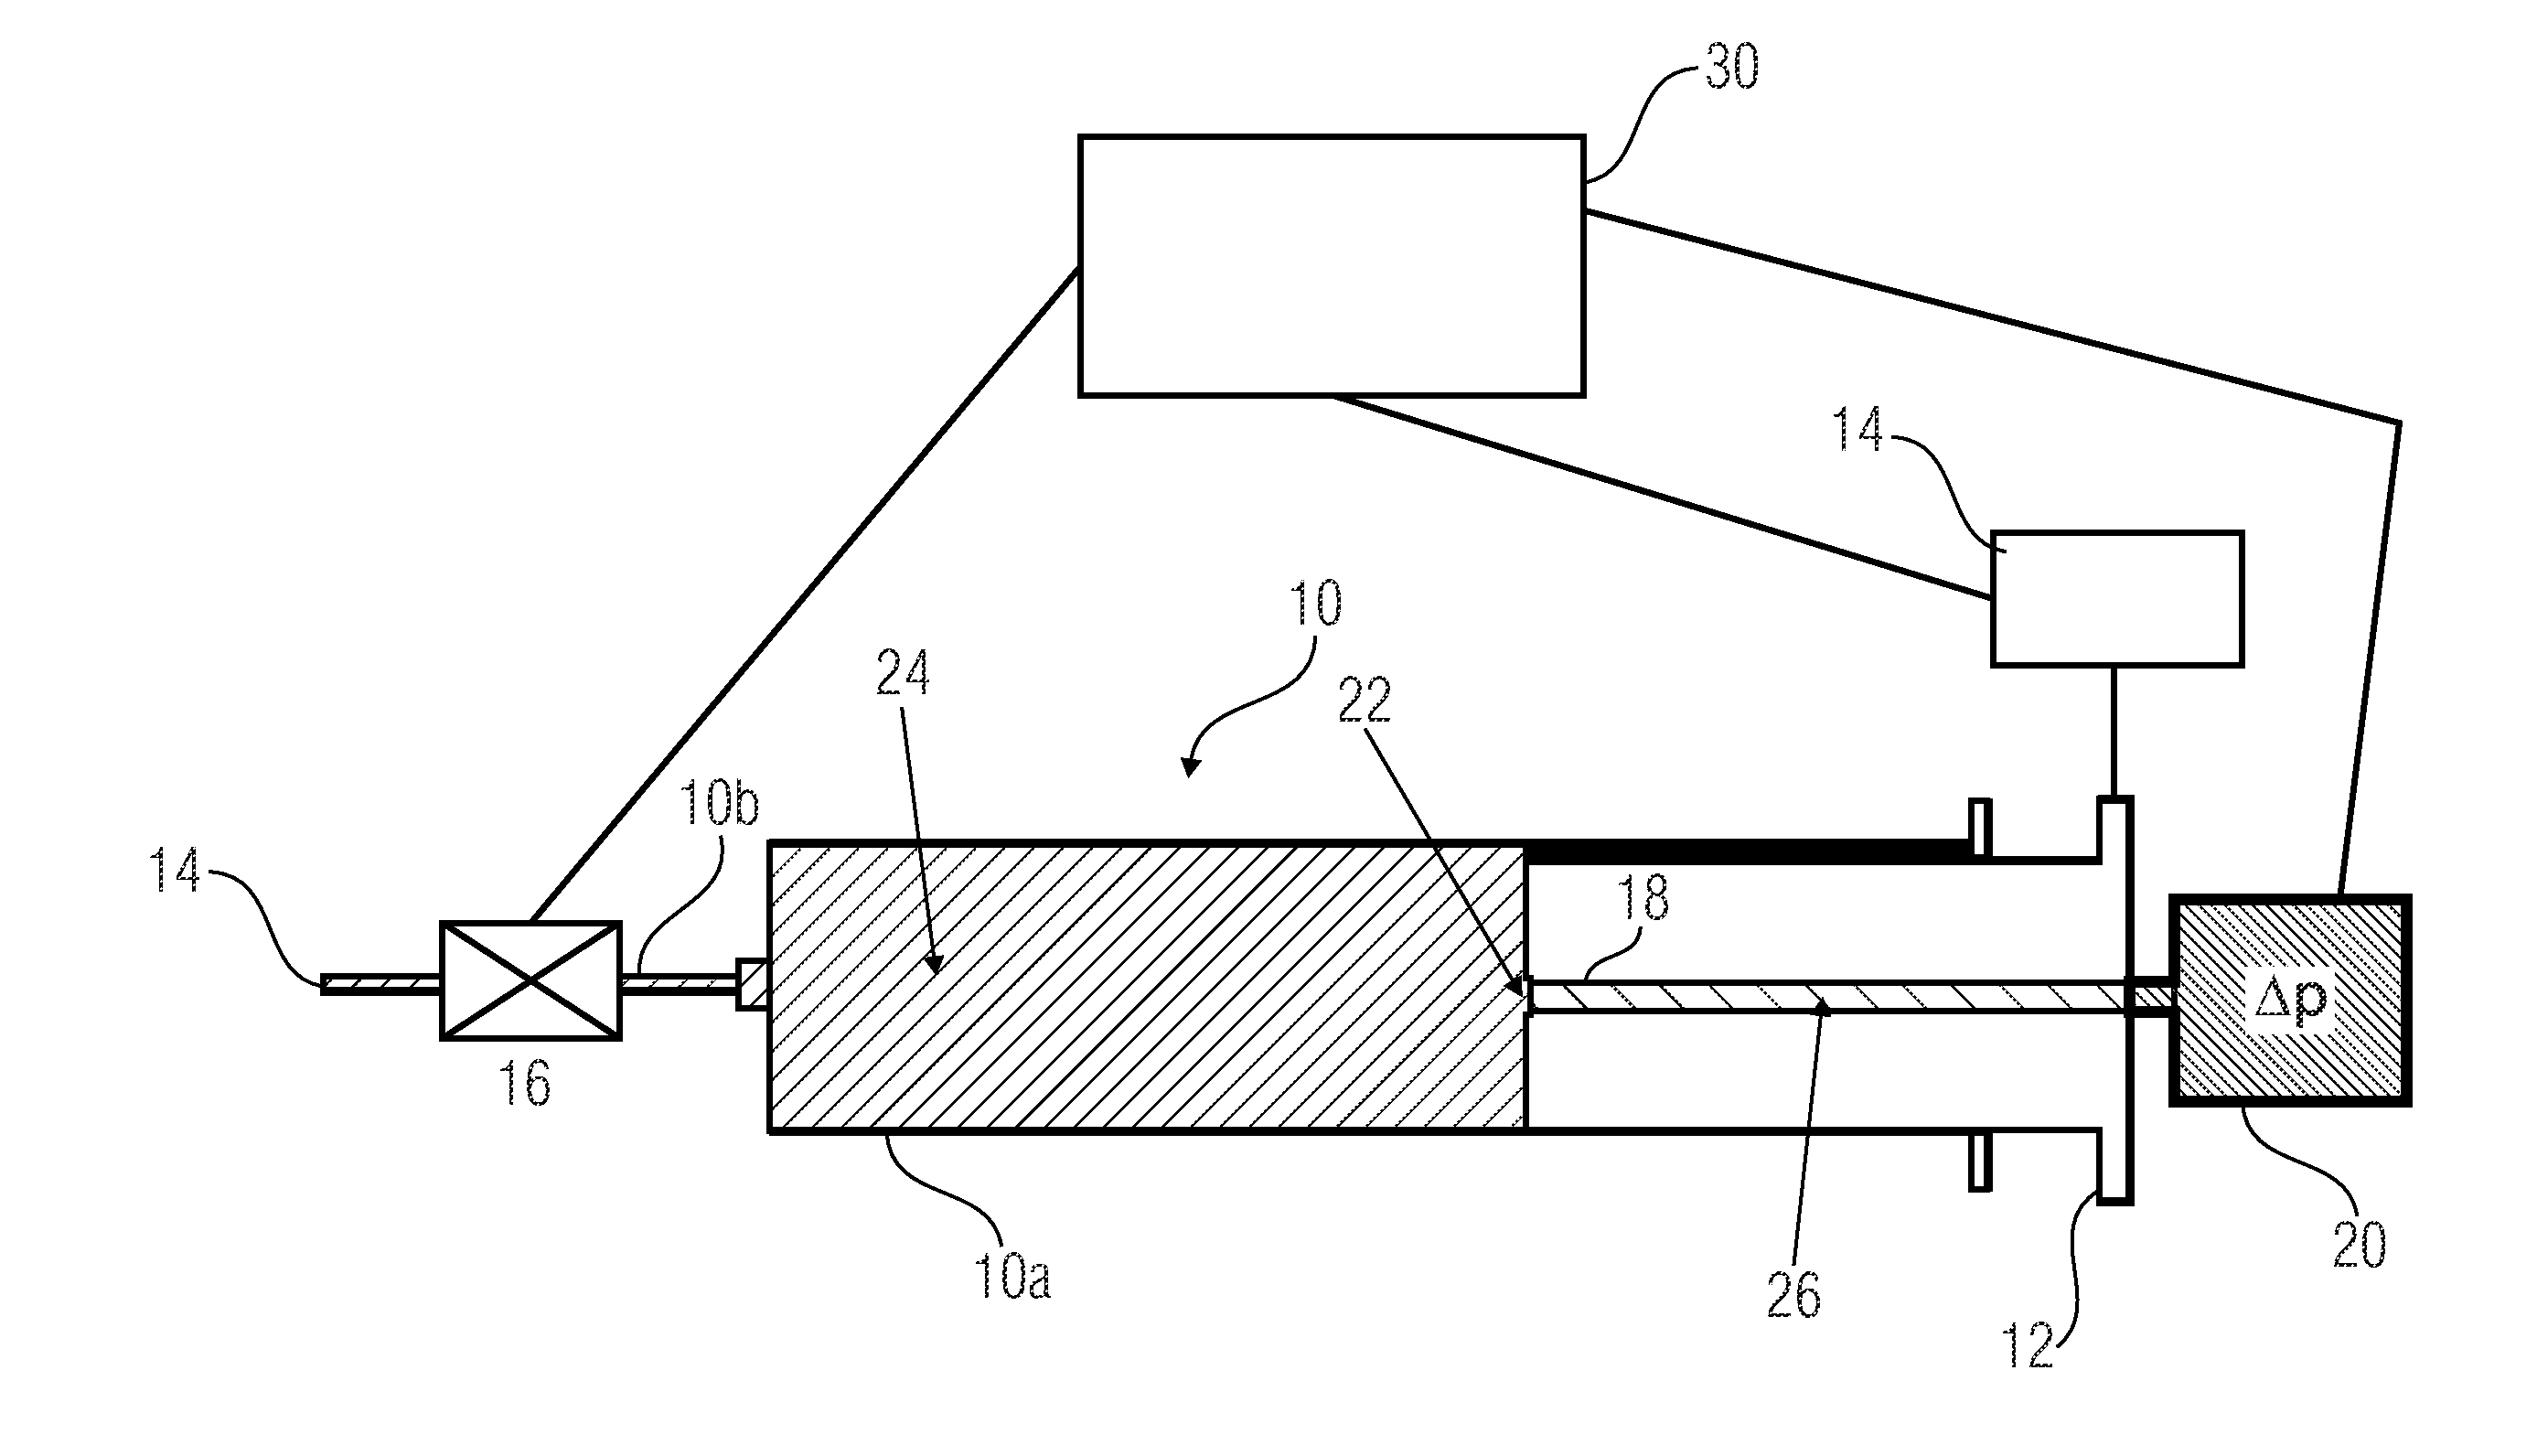 Device and method for dispensing or receiving a liquid volume